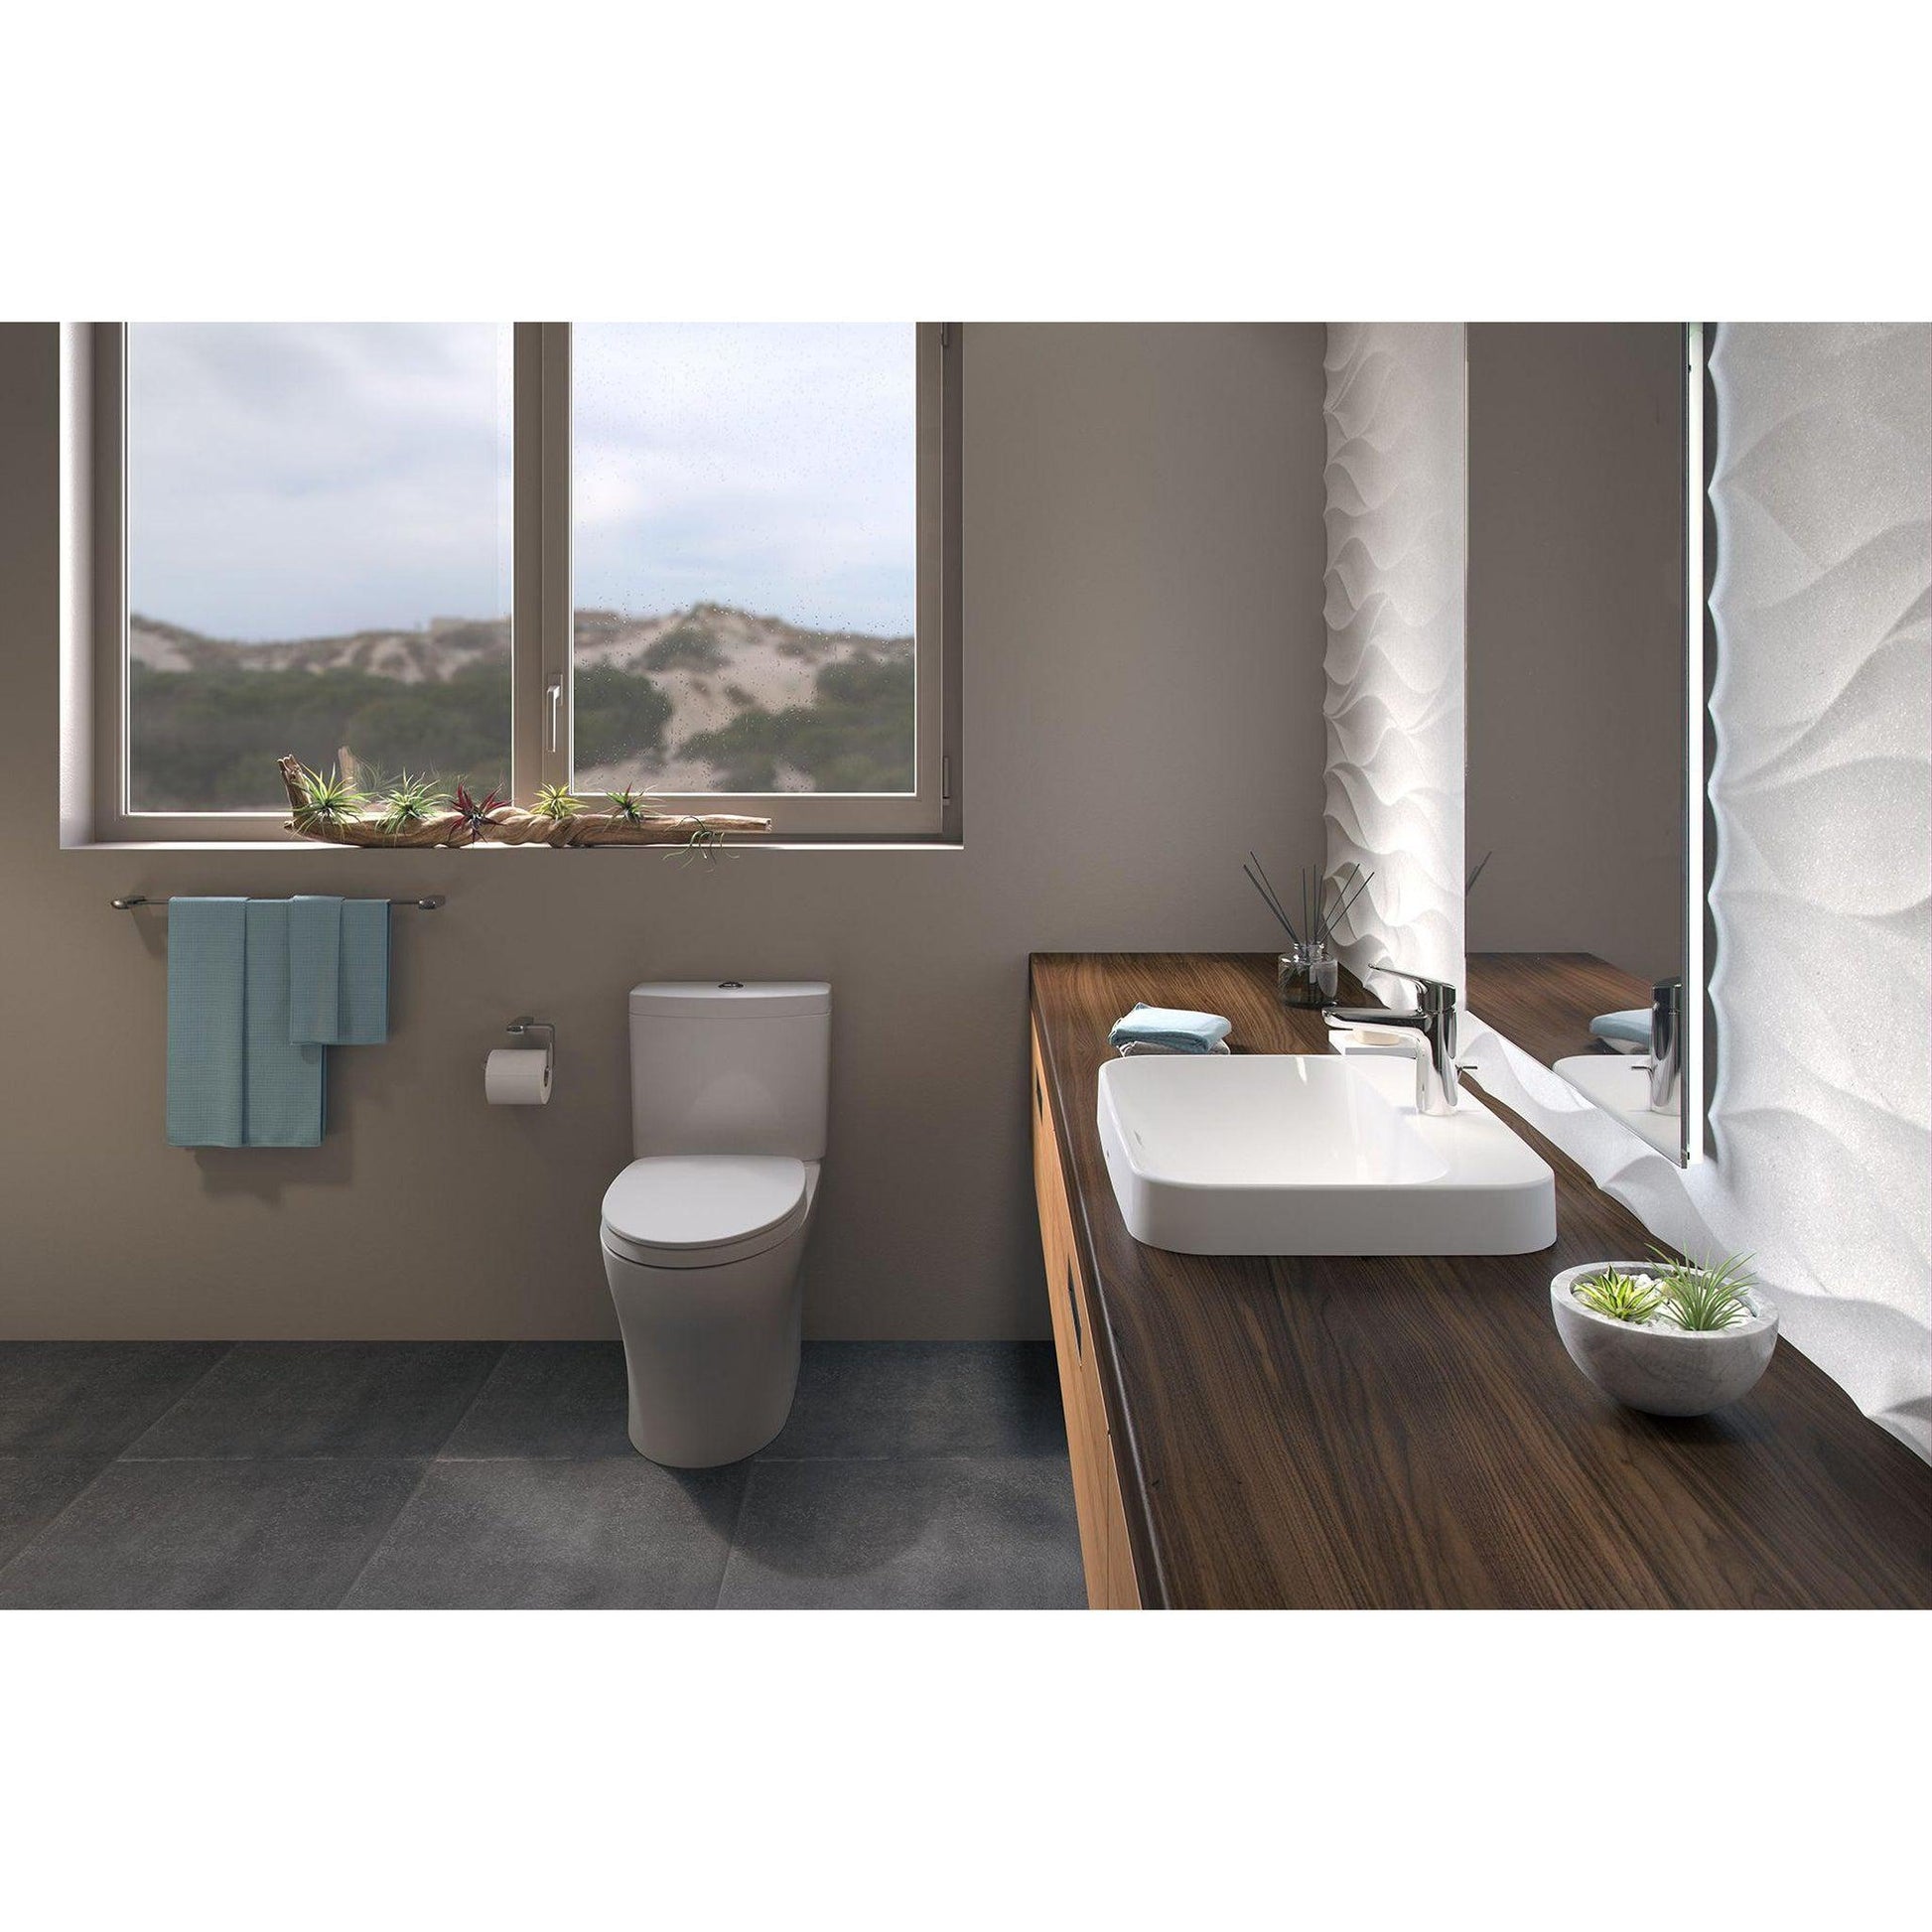 TOTO Aquia IV Cotton White 1.0 GPF & 0.8 GPF Dual-Flush Two-Piece Elongated Chair Height Toilet With WASHLET+ Connection - SoftClose Seat Included